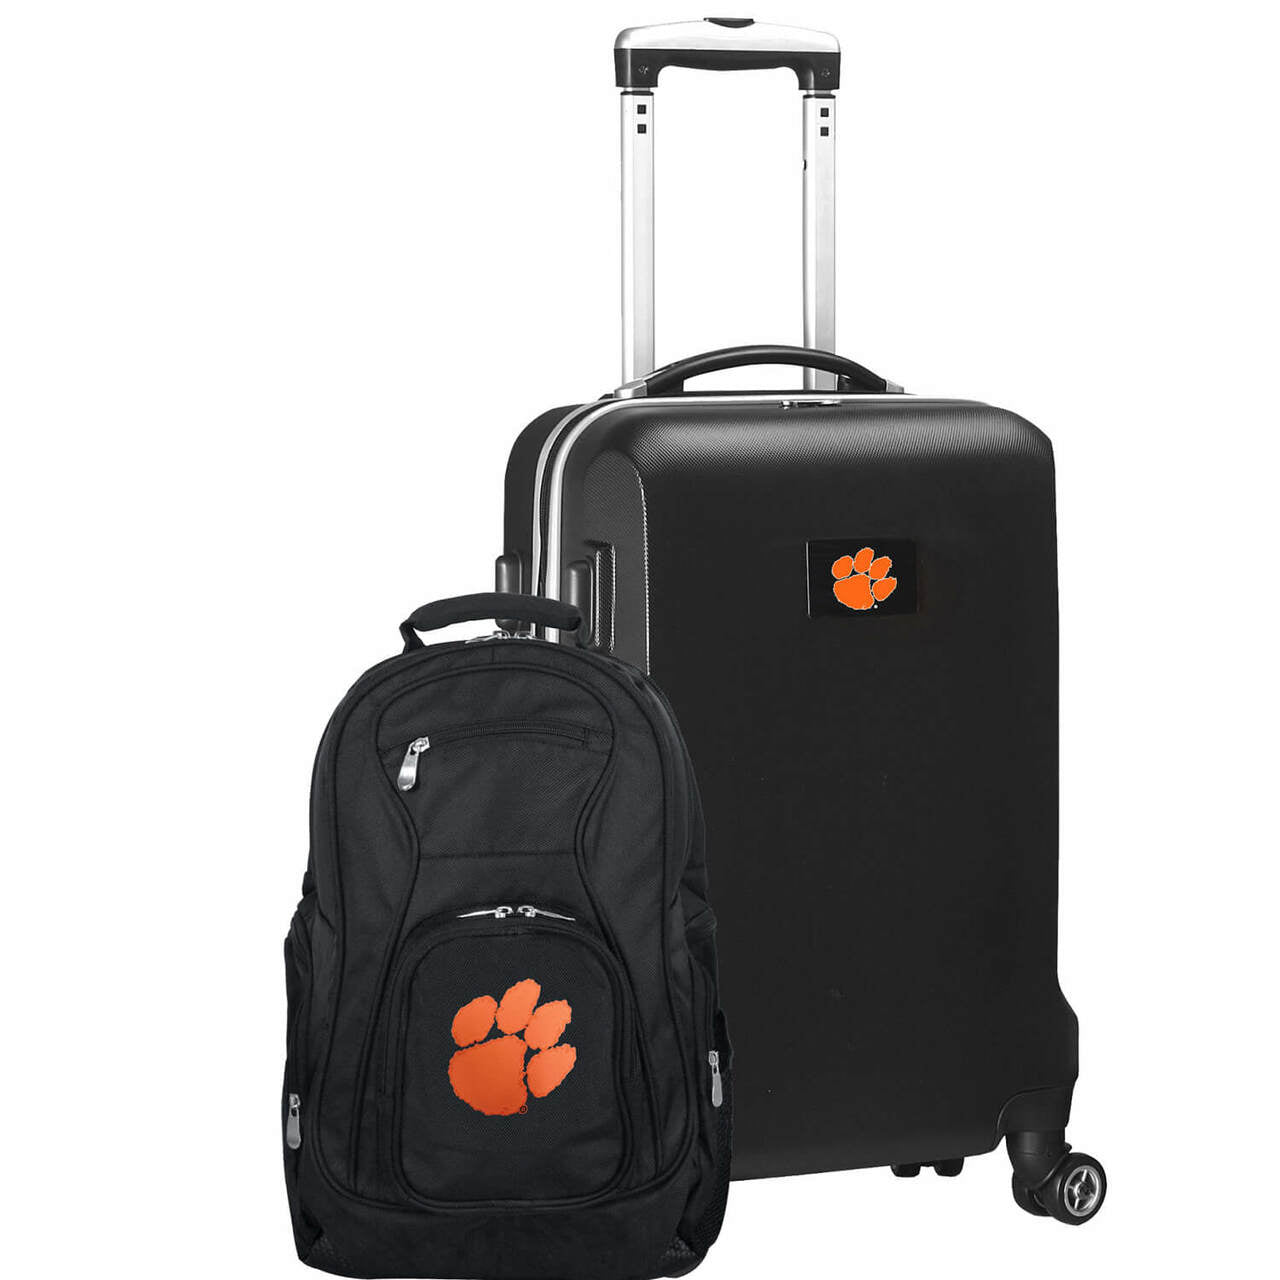 Clemson Tigers Deluxe 2-Piece Backpack and Carry on Set in Black